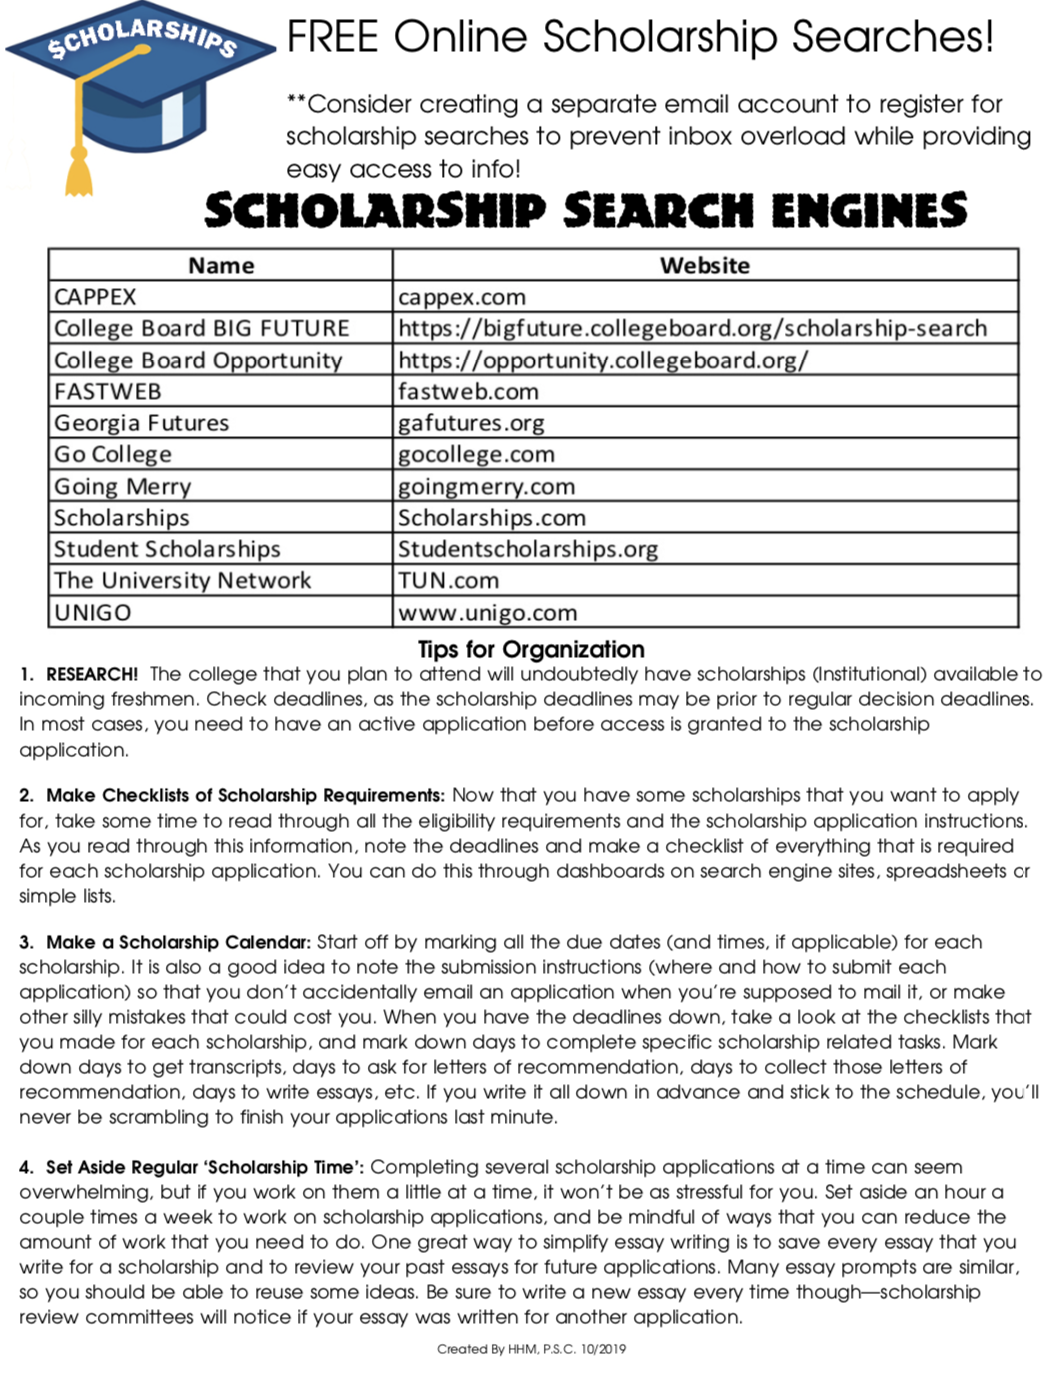 Where can I find helpful information about College Board Scholarship Search?